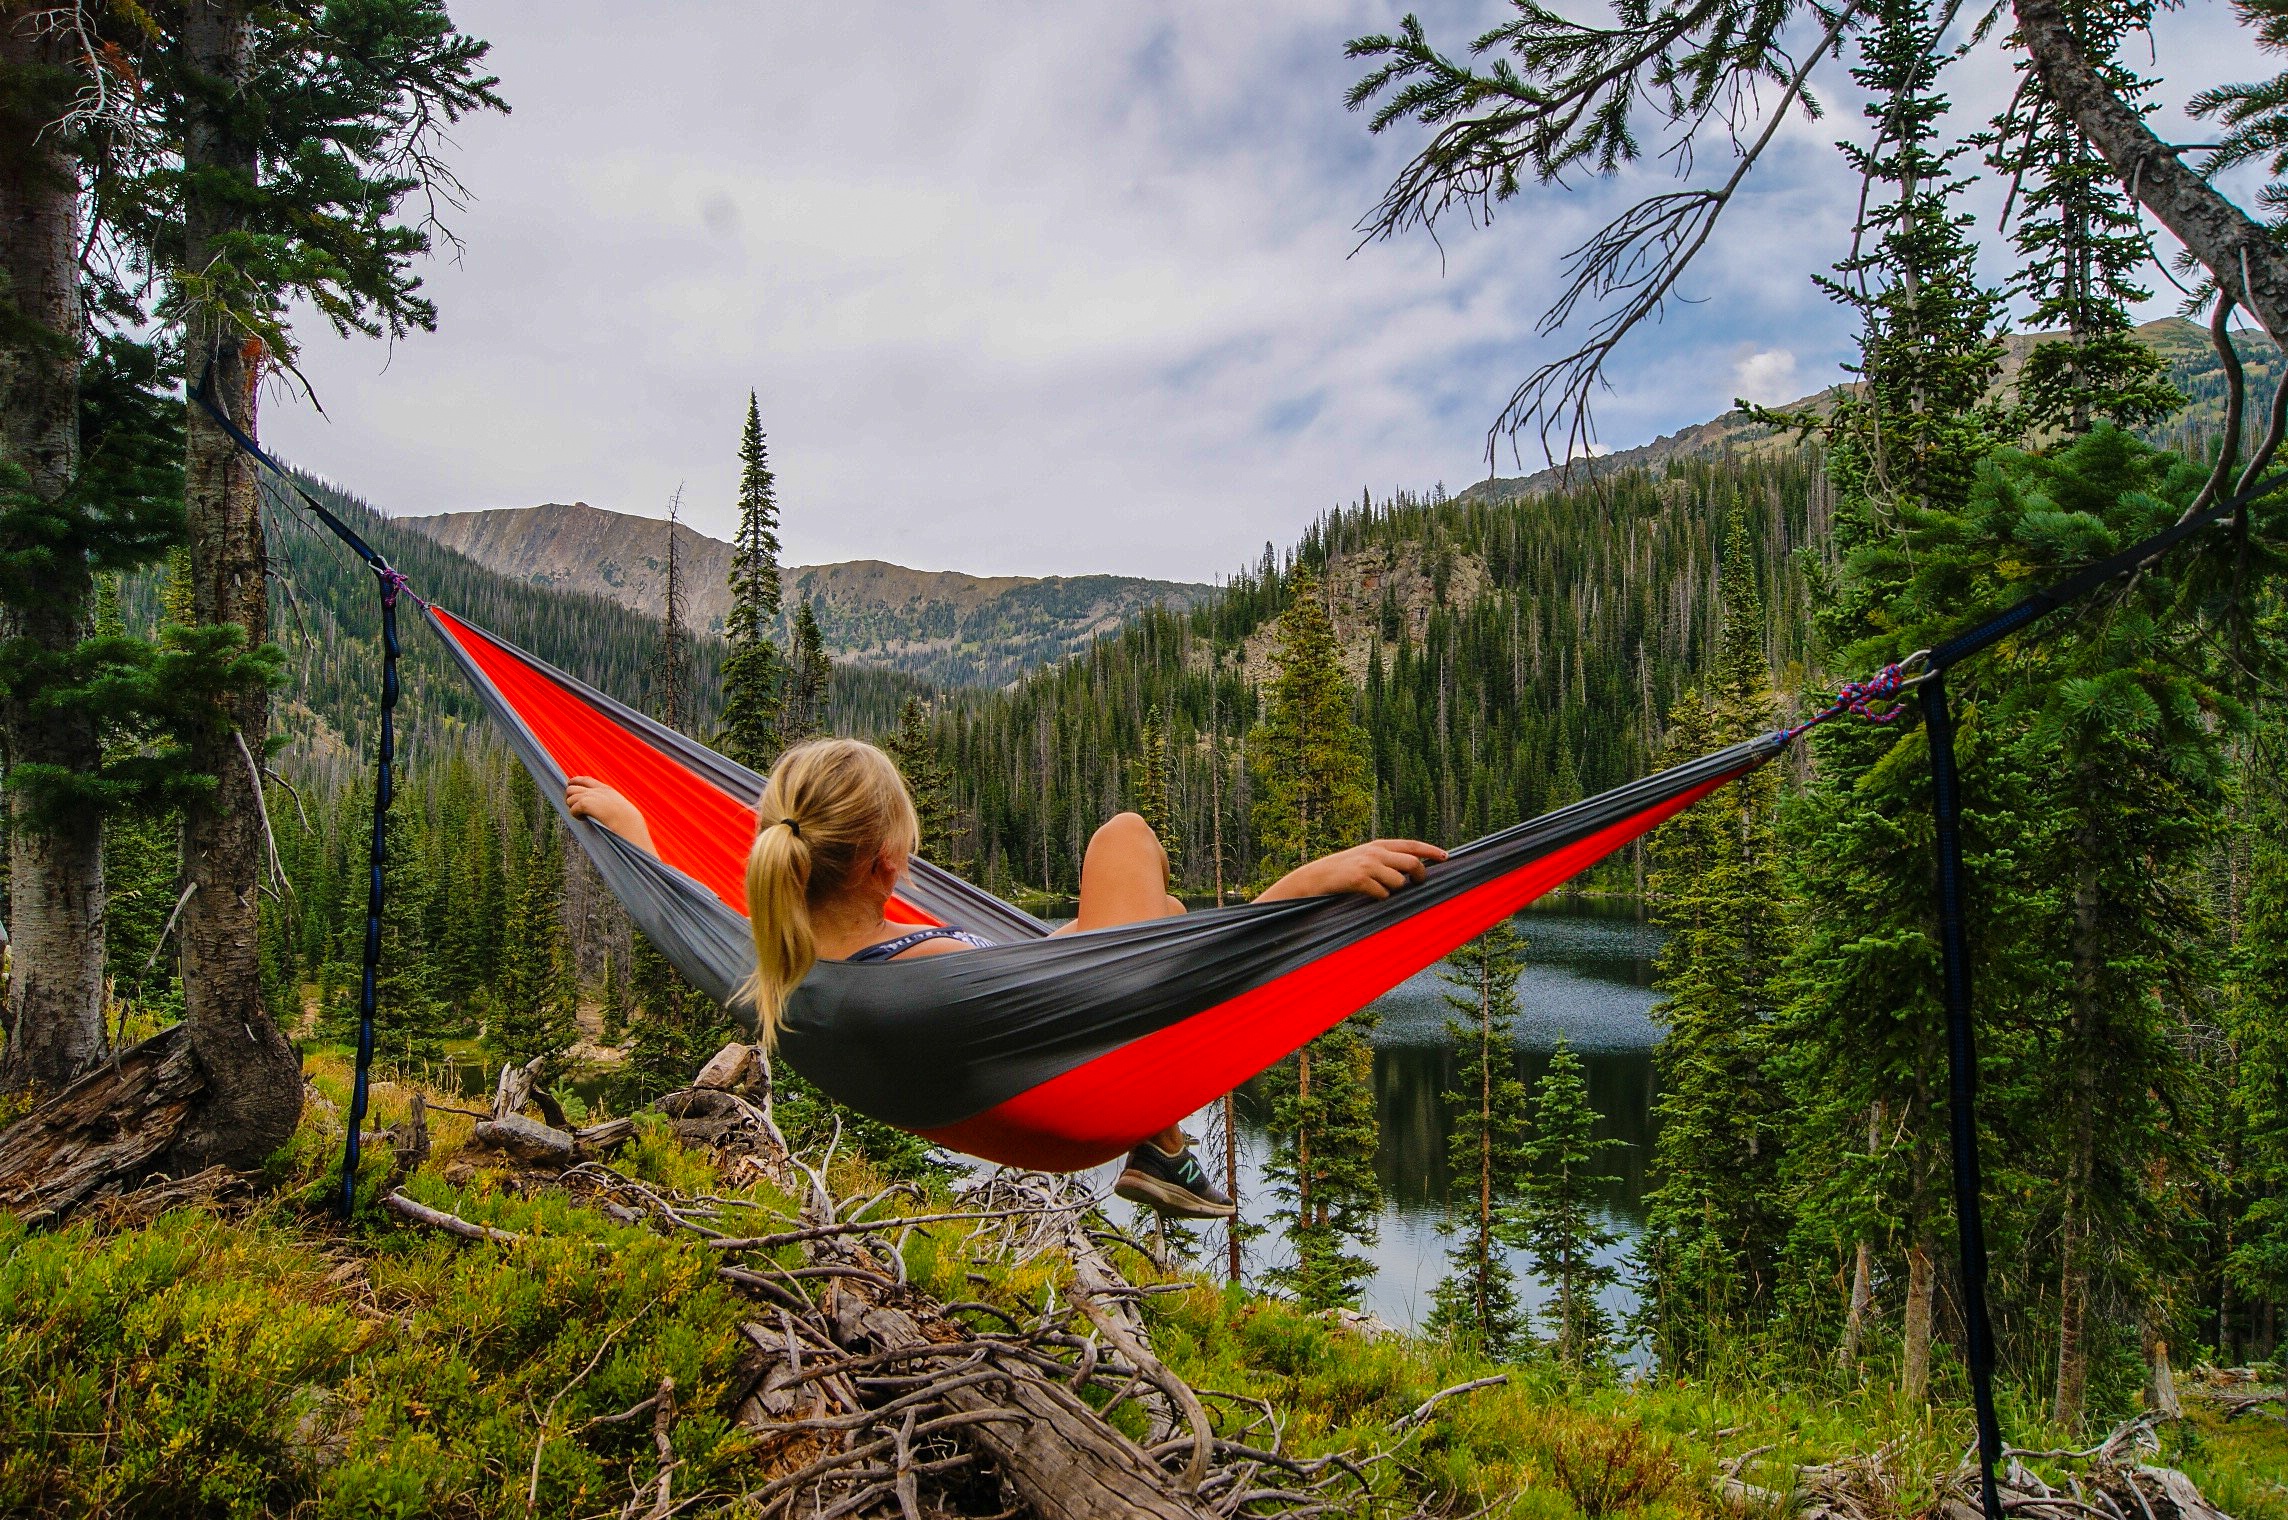 Hang bed in nature photo